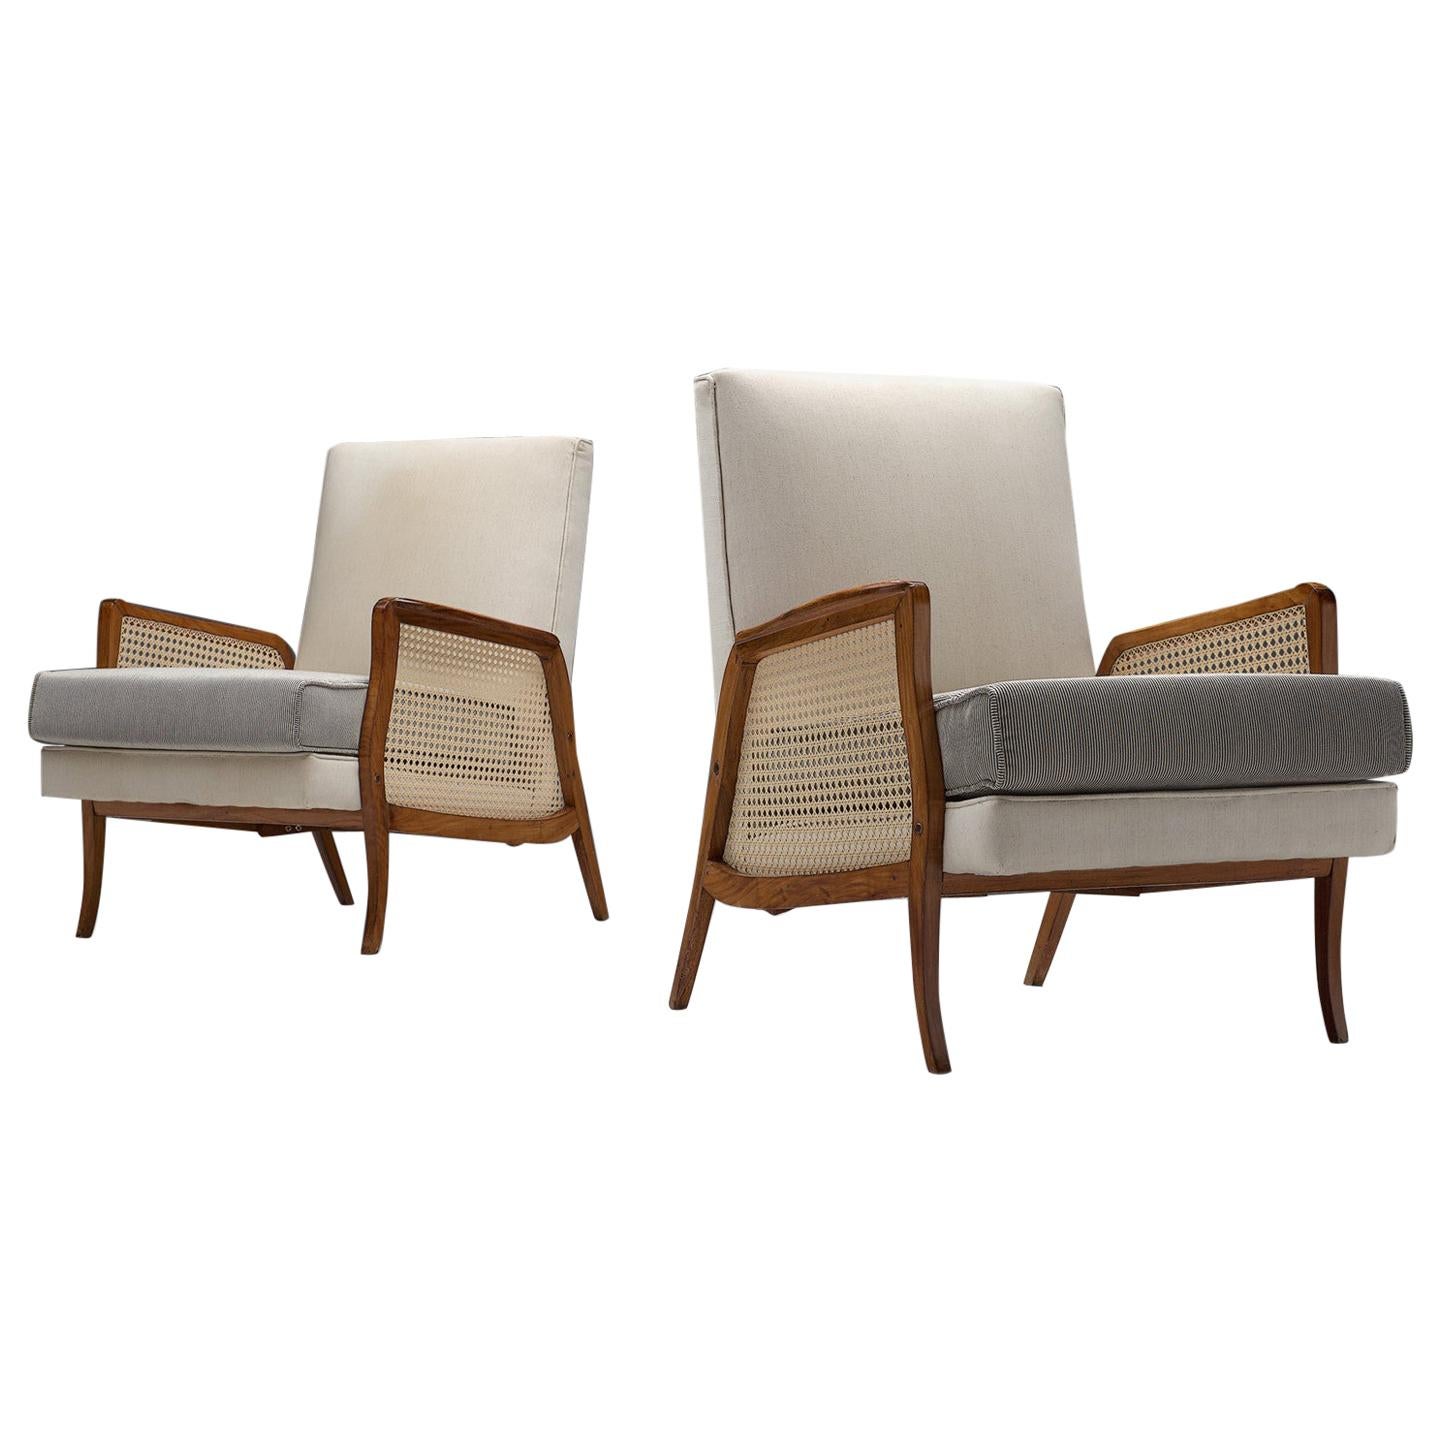 Brazilian Lounge Chairs with Caviuna, Cane and Upholstery